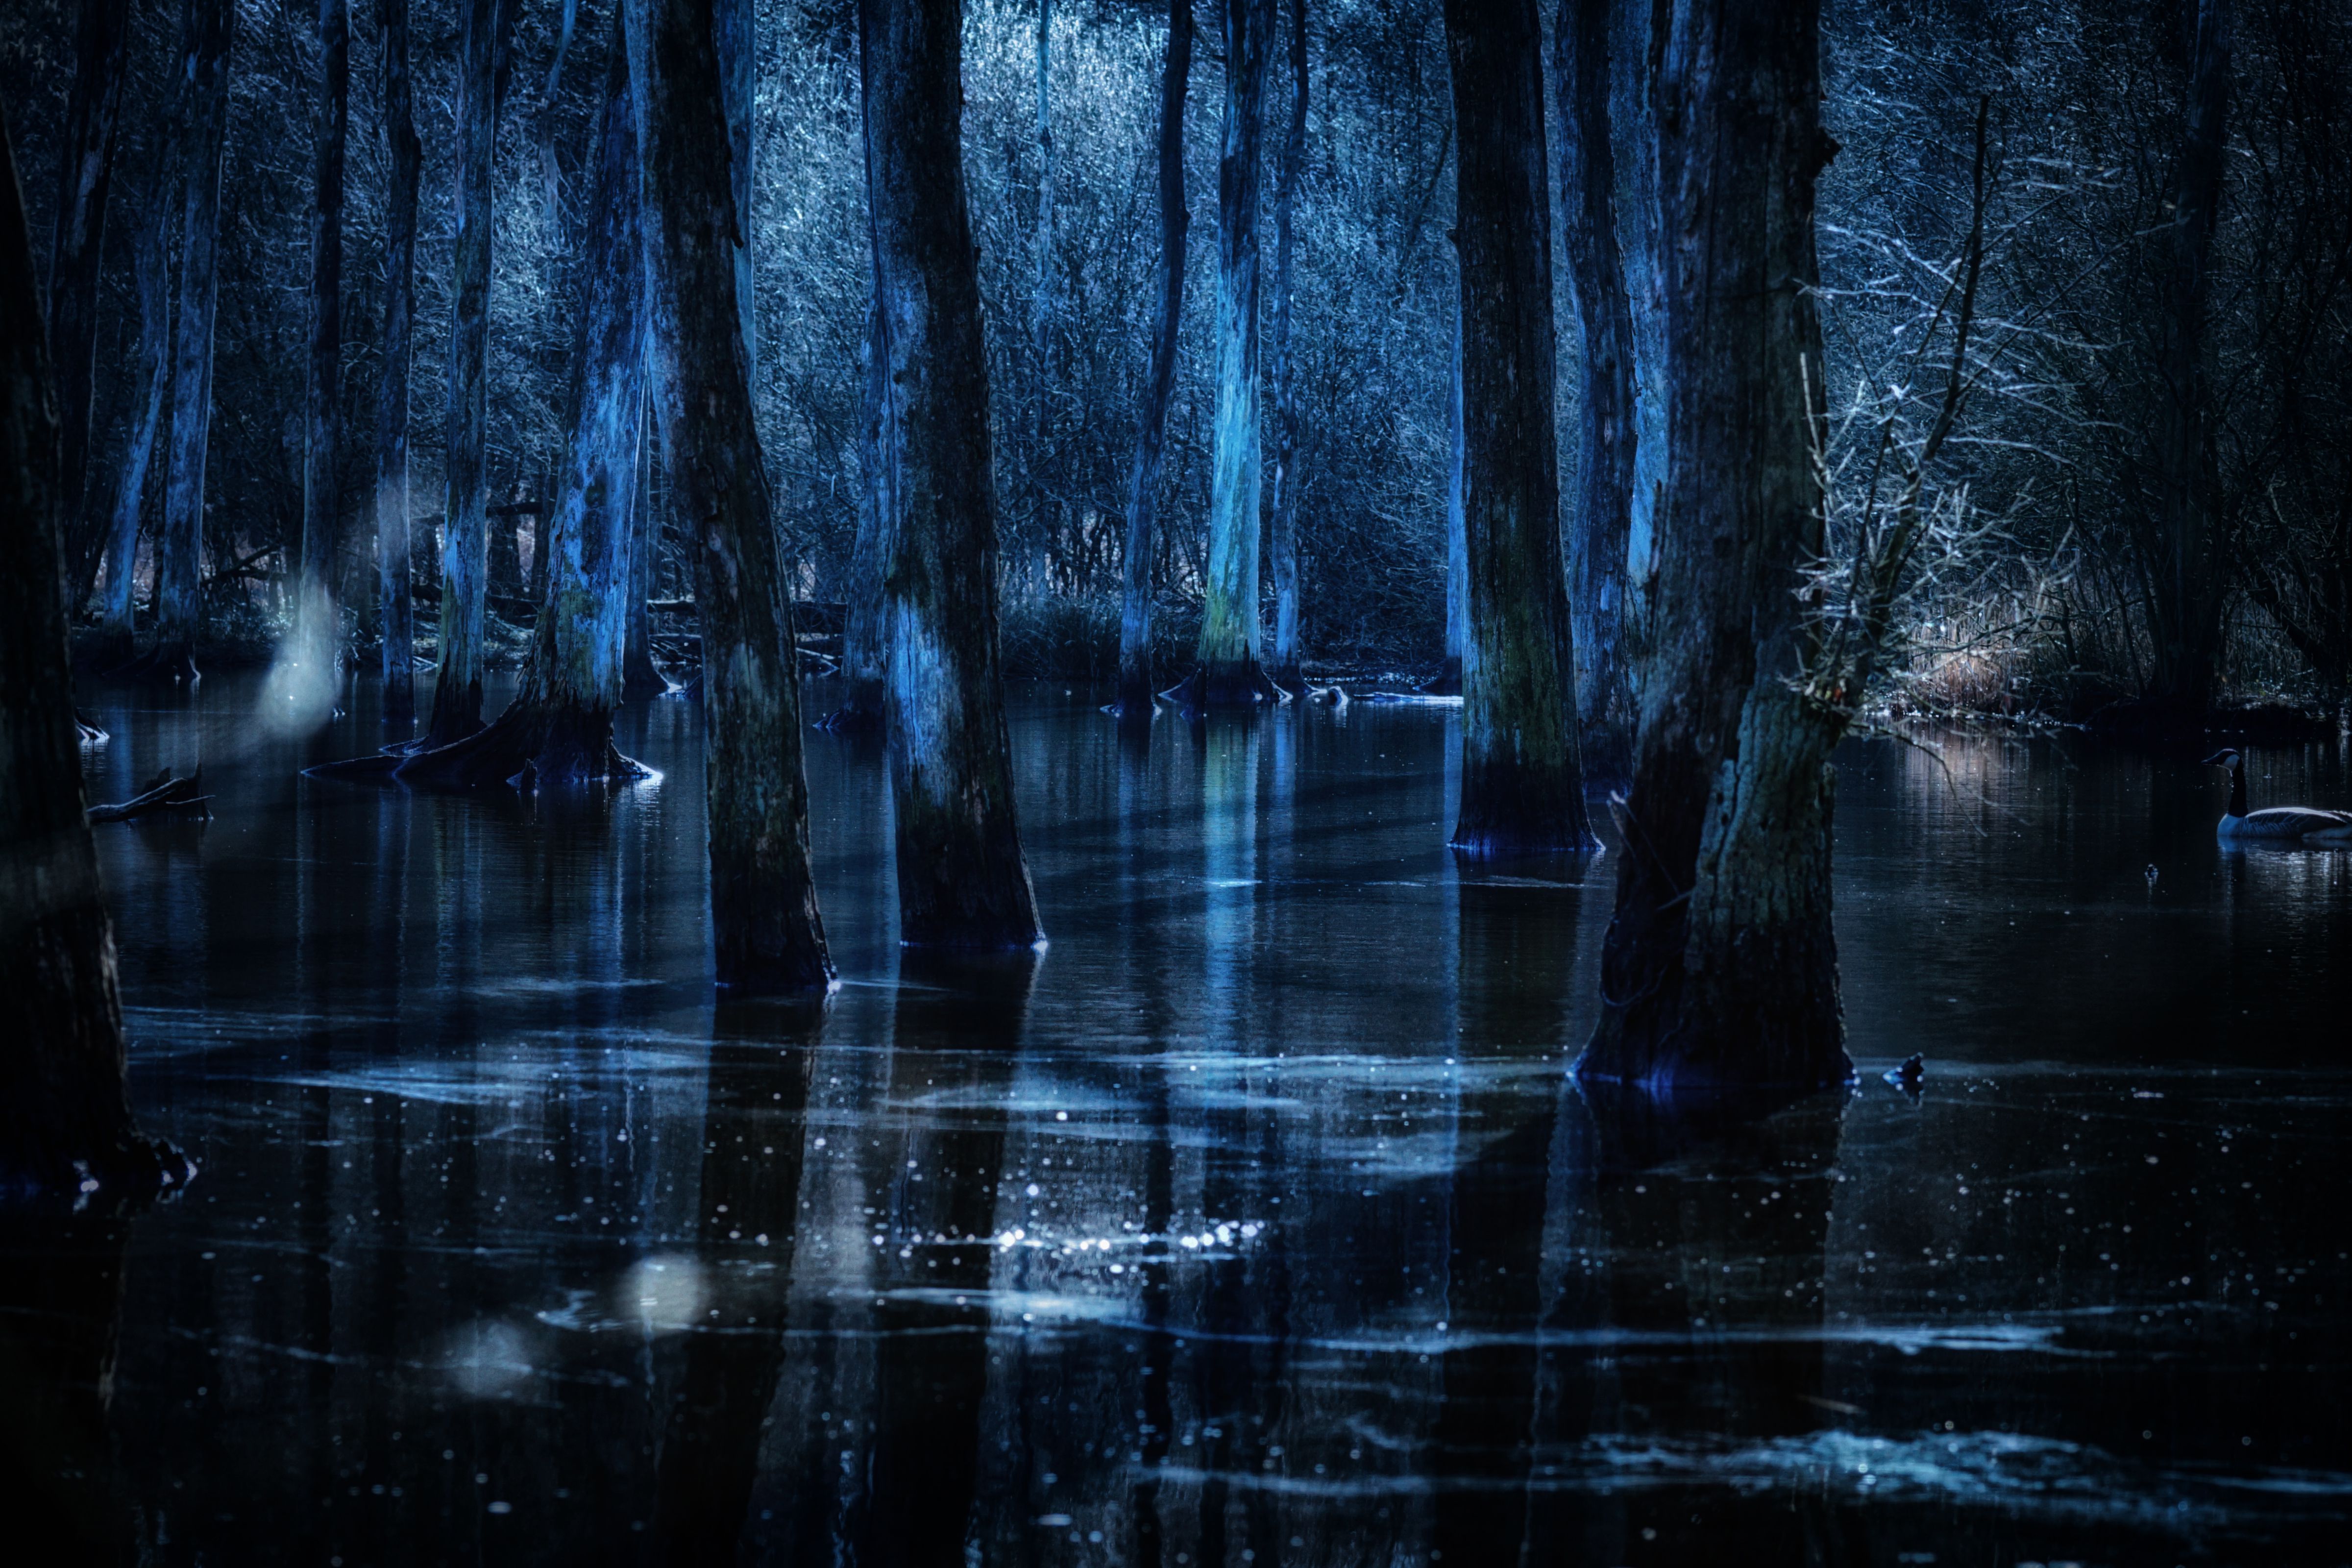 Wallpaper, water, reflection, nature, darkness, tree, atmosphere, light, swamp, bayou, wetland, phenomenon, woodland, watercourse, night, midnight, branch, computer wallpaper, Formation, old growth forest, landscape 4800x3200